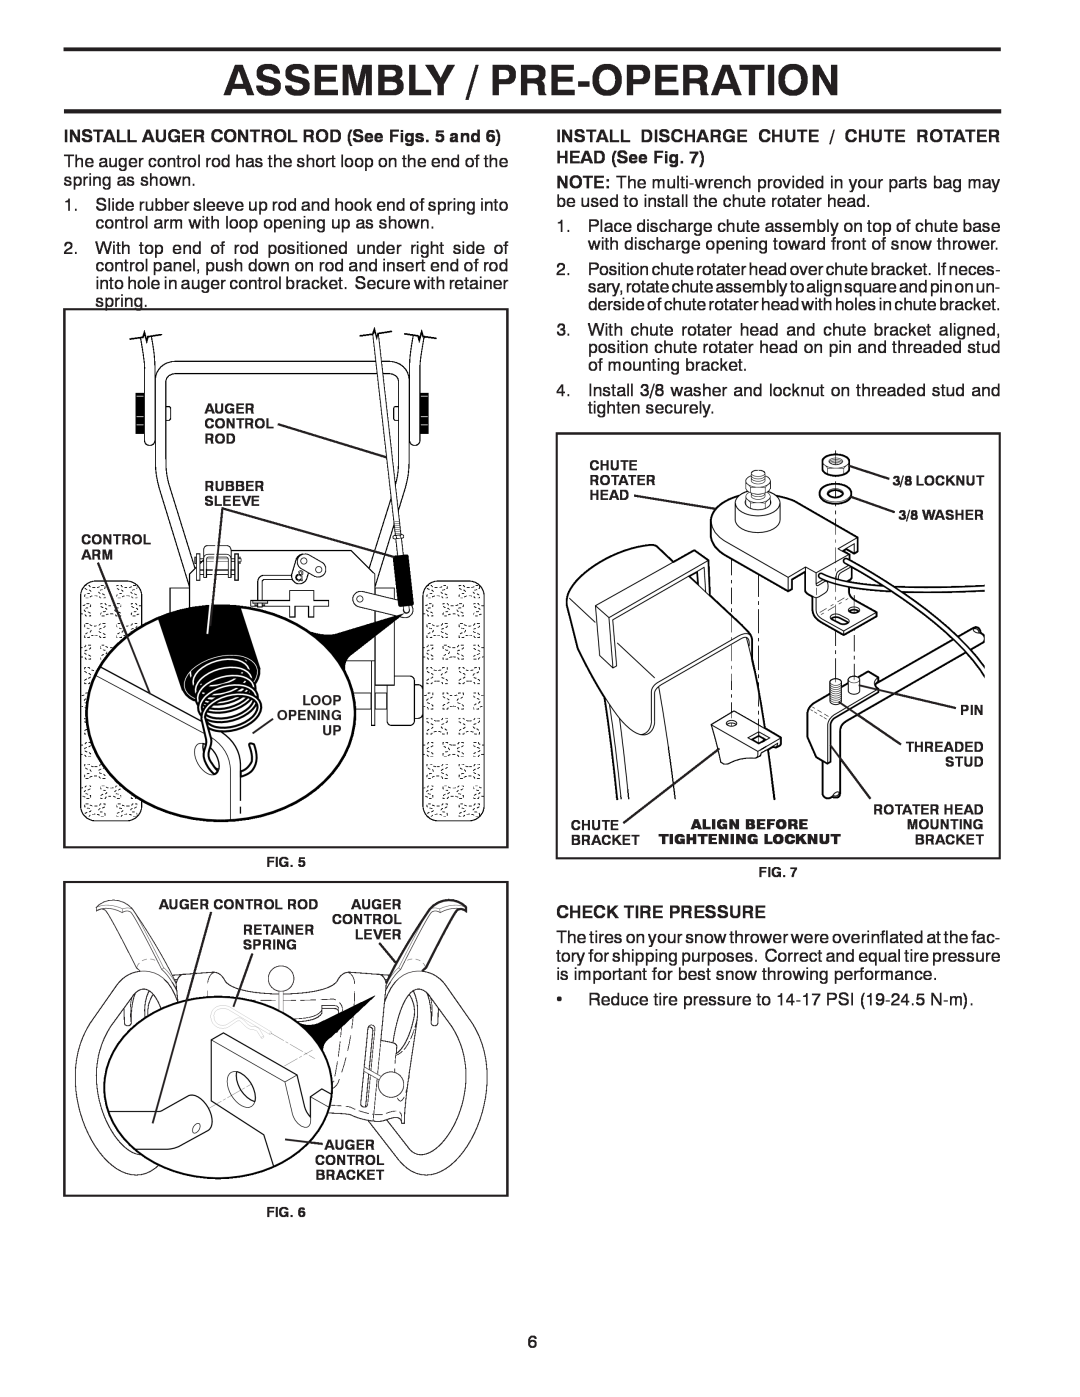 Poulan 418962 owner manual Assembly / Pre-Operation, INSTALL AUGER CONTROL ROD See Figs. 5 and, Check Tire Pressure 